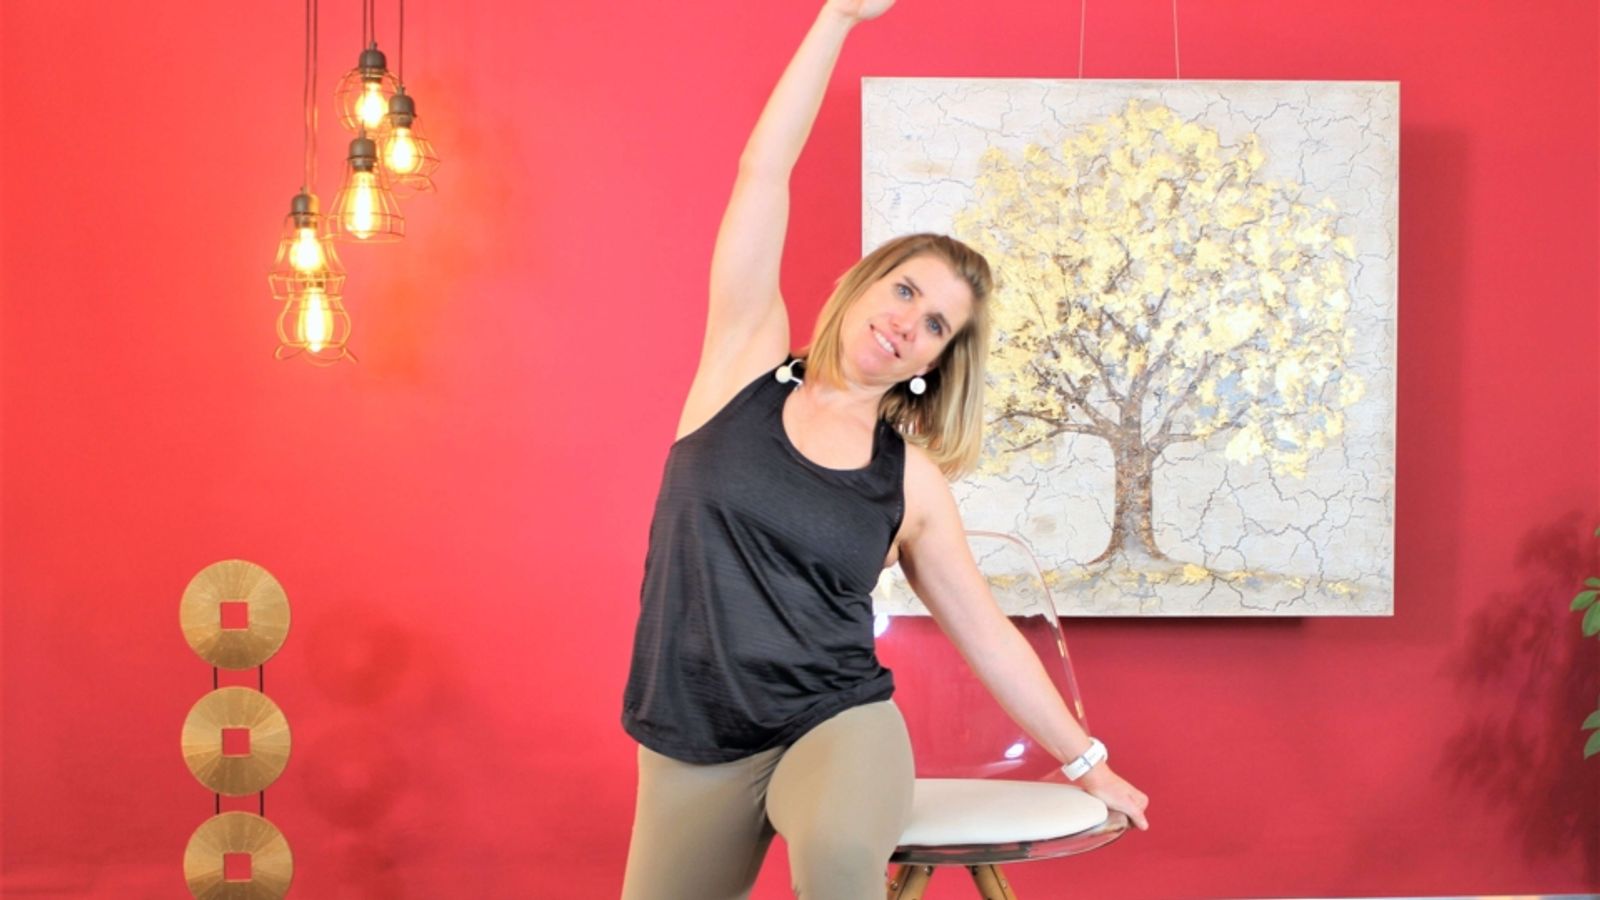 Take a break with Pilates - Let go of everyday stress